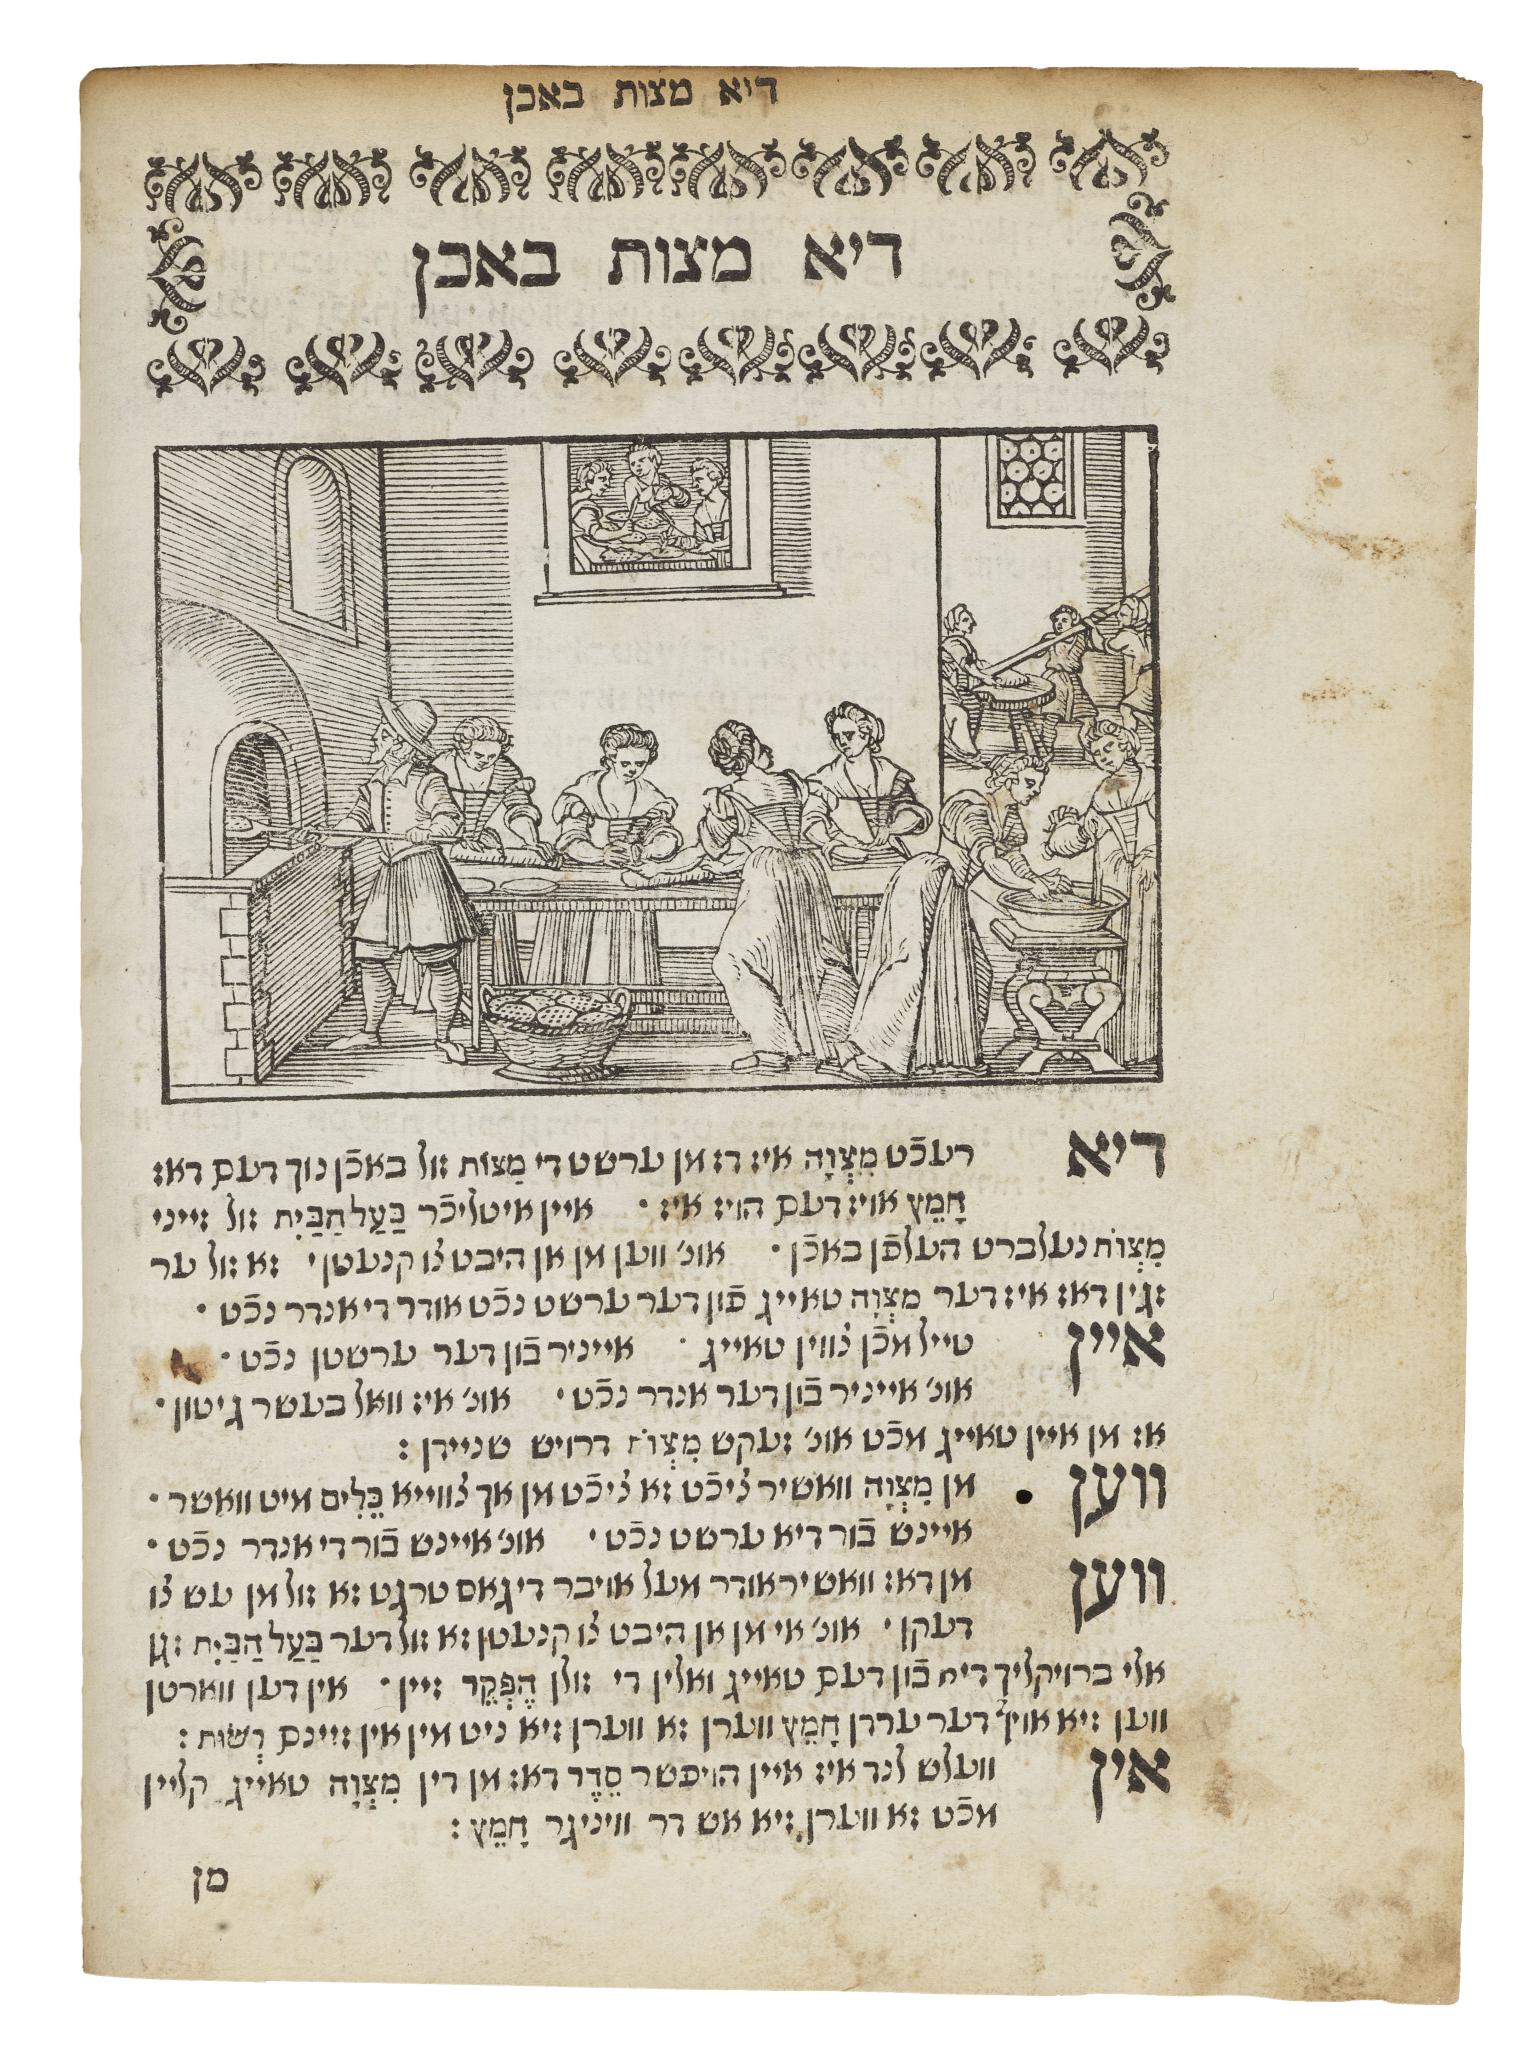 Woodcut illustration of men and women baking with Yiddish text above and below.